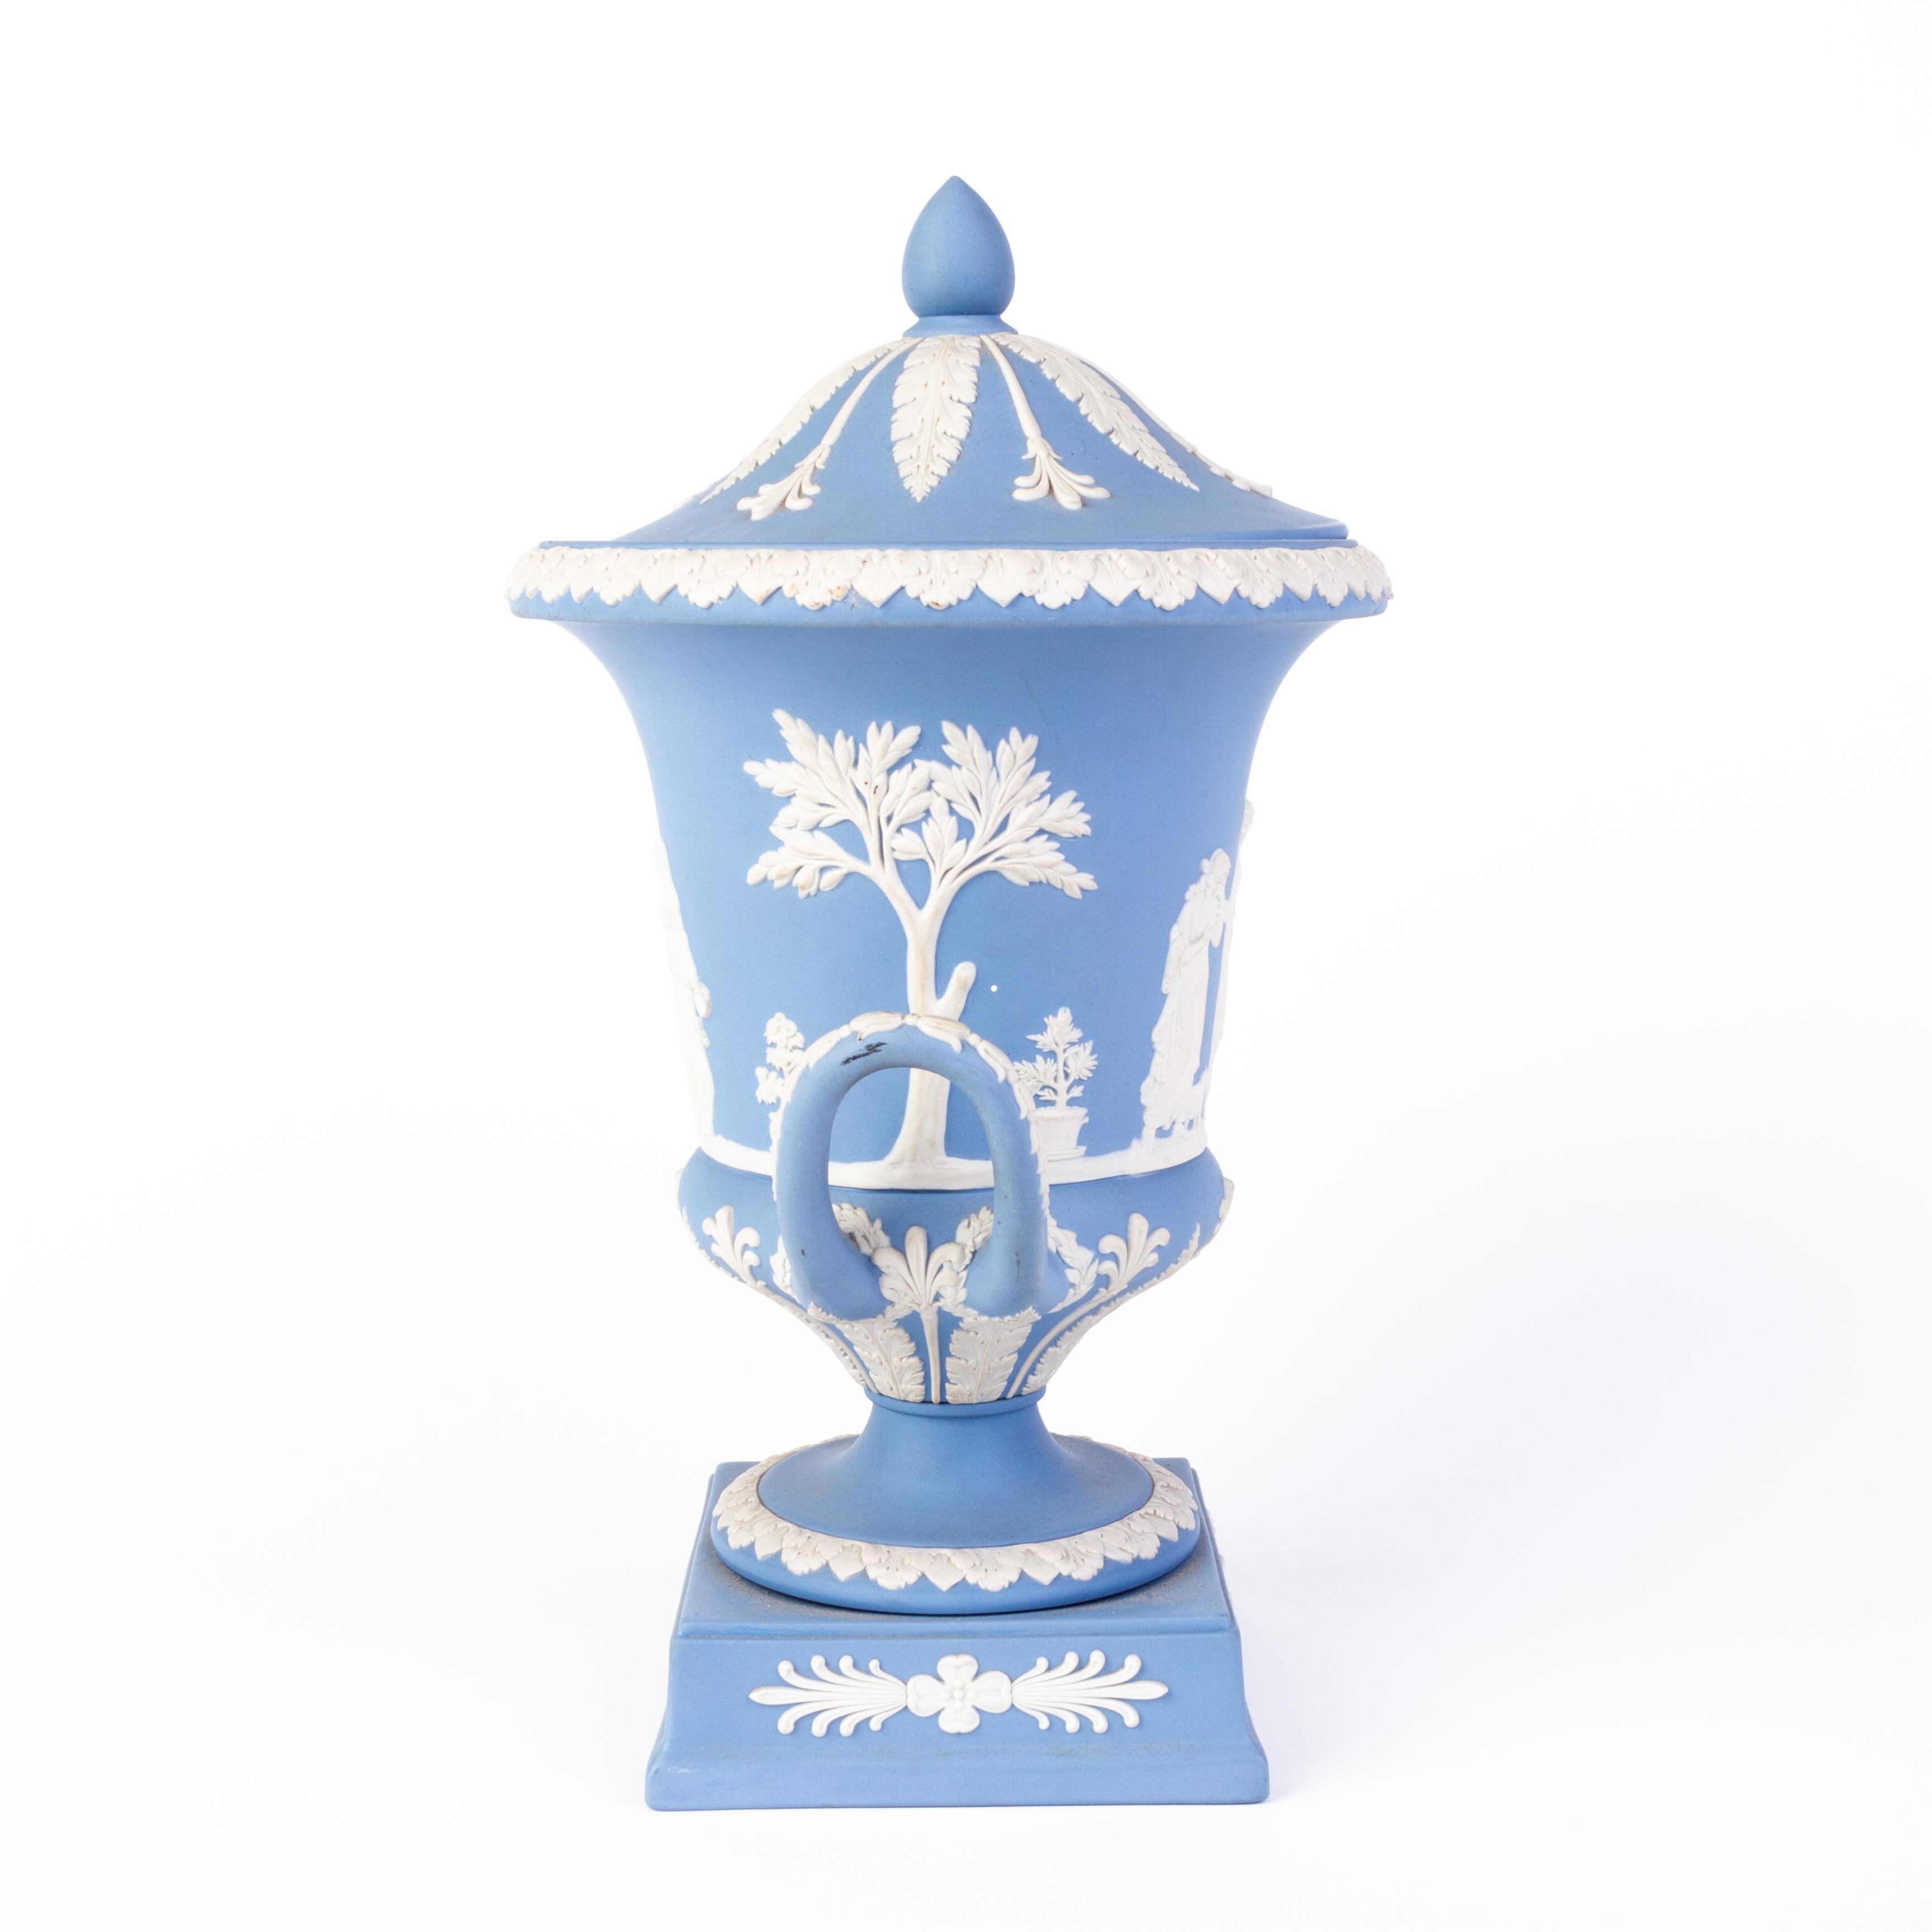 Large Wedgwood Blue Jasperware Cameo Neoclassical Urn Campana Vase
Good condition 
From a private collection.
Free international shipping.